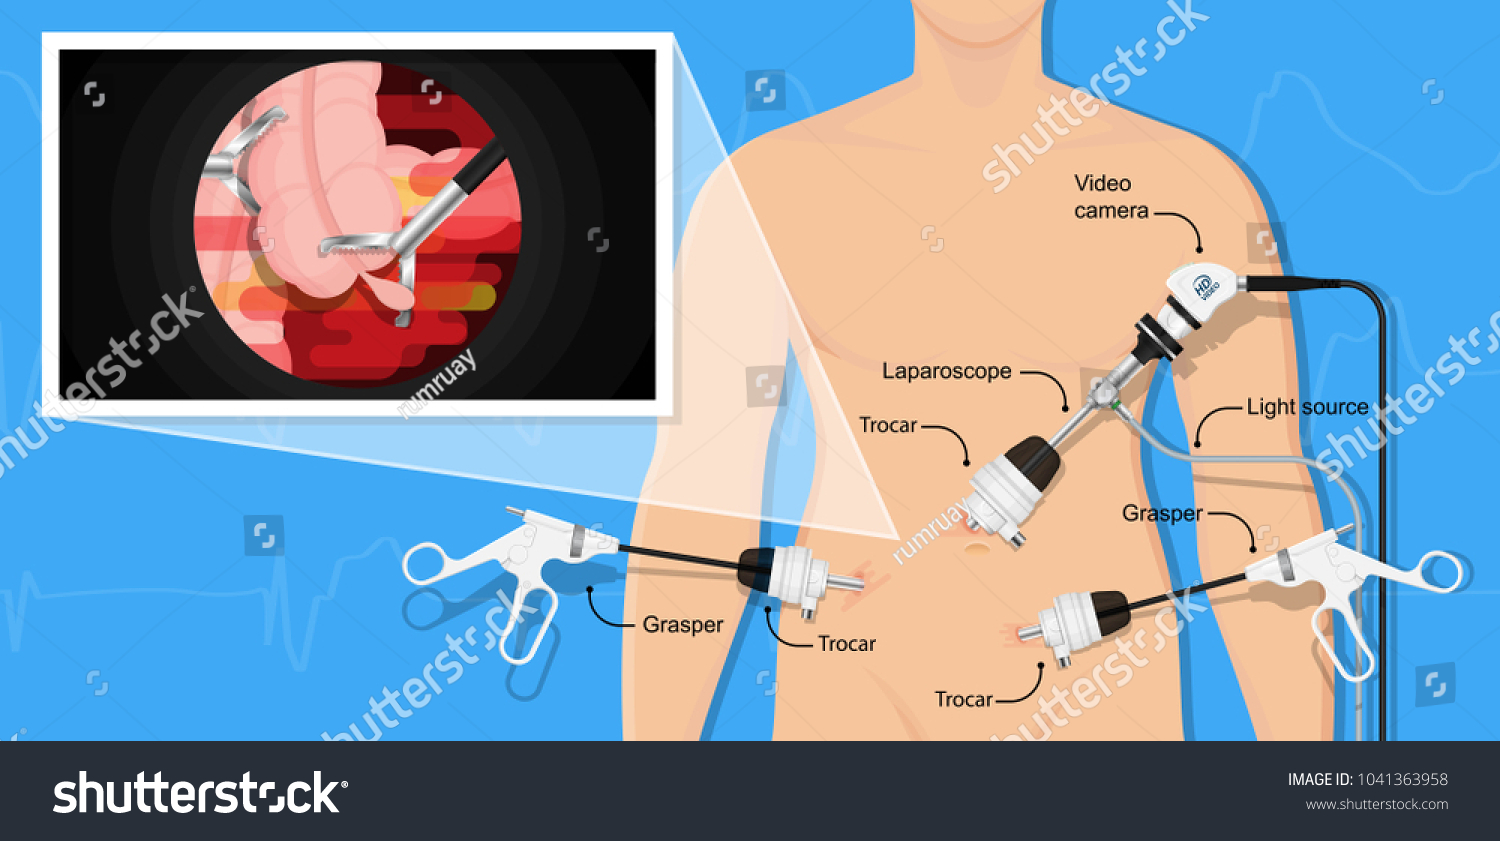 appendectomy medical surgery organ colon tool heal room body doctor pain scars liver cancer tummy tumor mass trocars nurse pelvic video health system display urology monitor endoscopic cholecystitis #1041363958